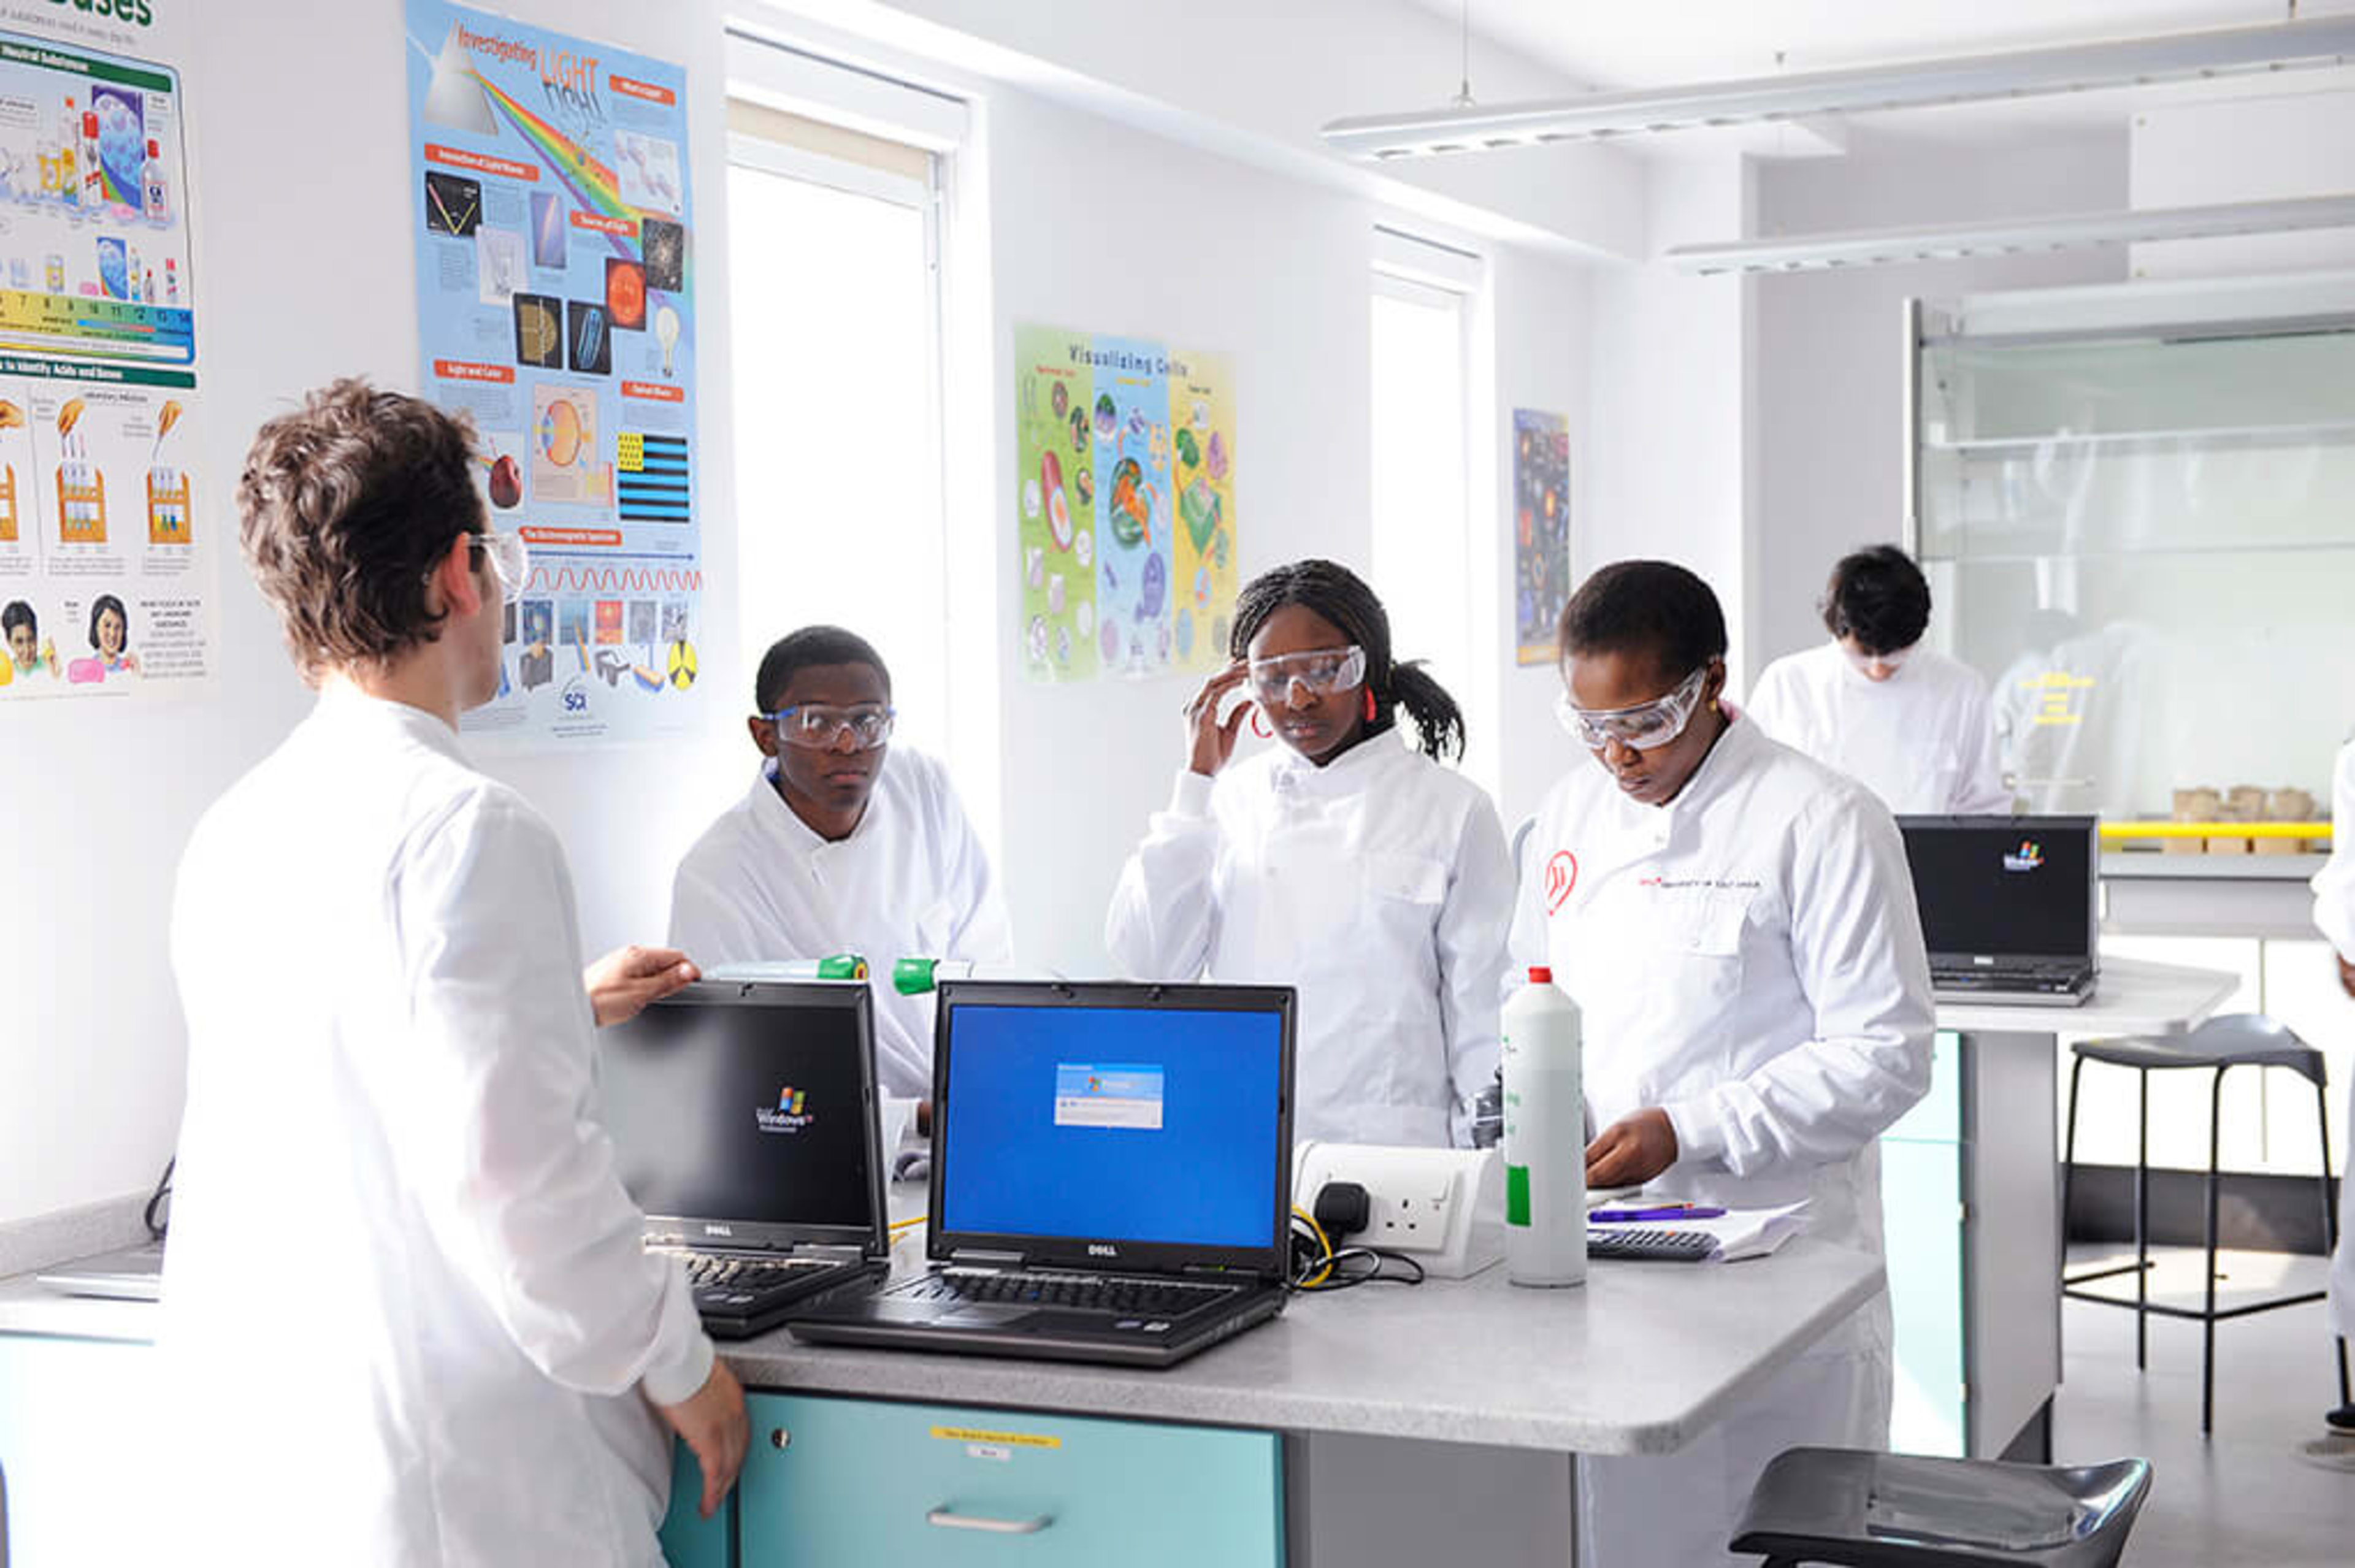 The INTO Centre has the same high quality equipment in its science labs as UEA